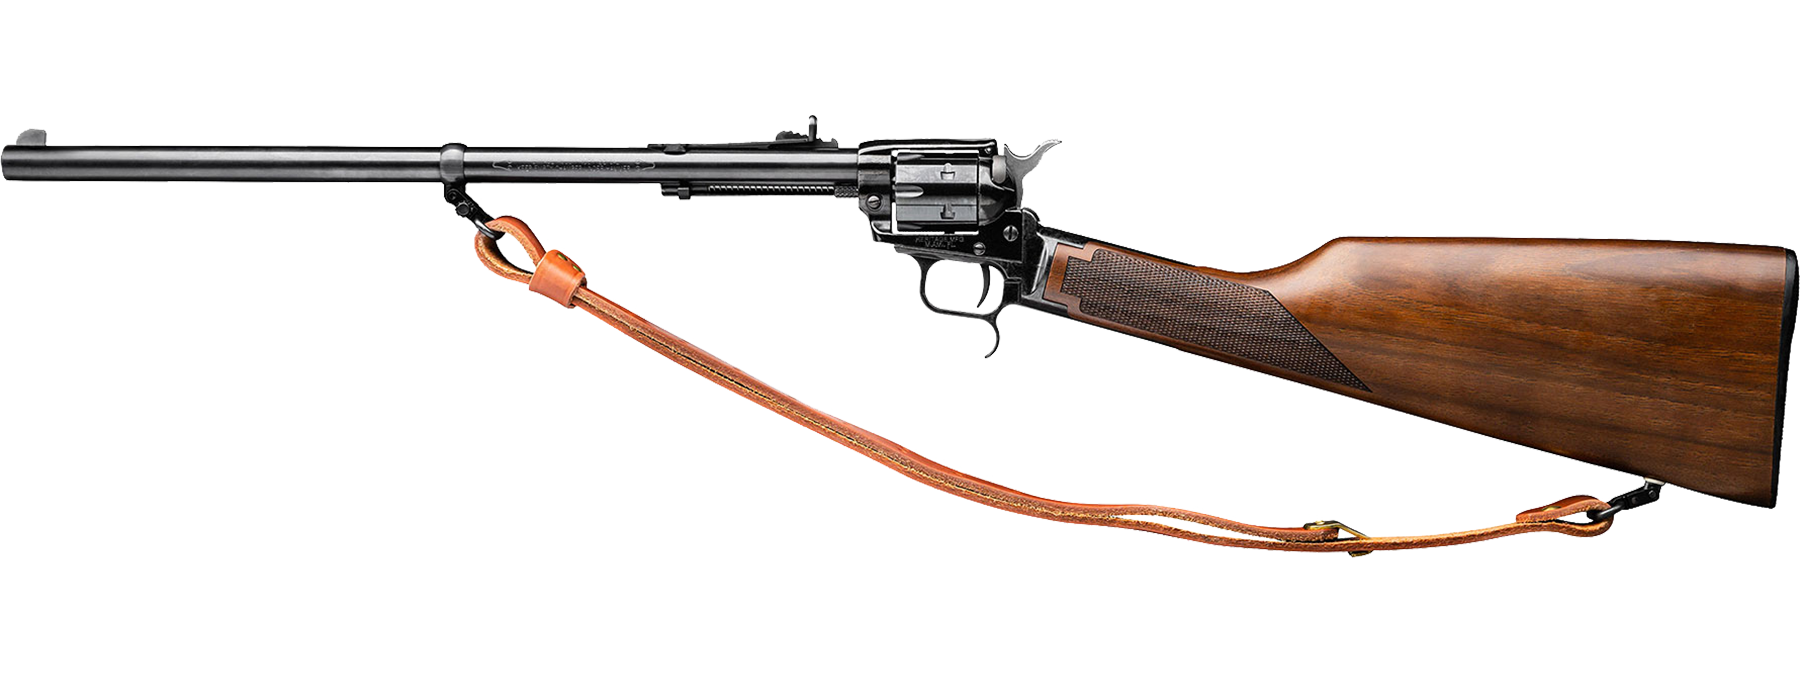 Rough Rider® Rancher™ Carbine 22 LR Black 16” Barrel 6 Rounds Walnut Stock, Buckhorn Sight and Leather Sling